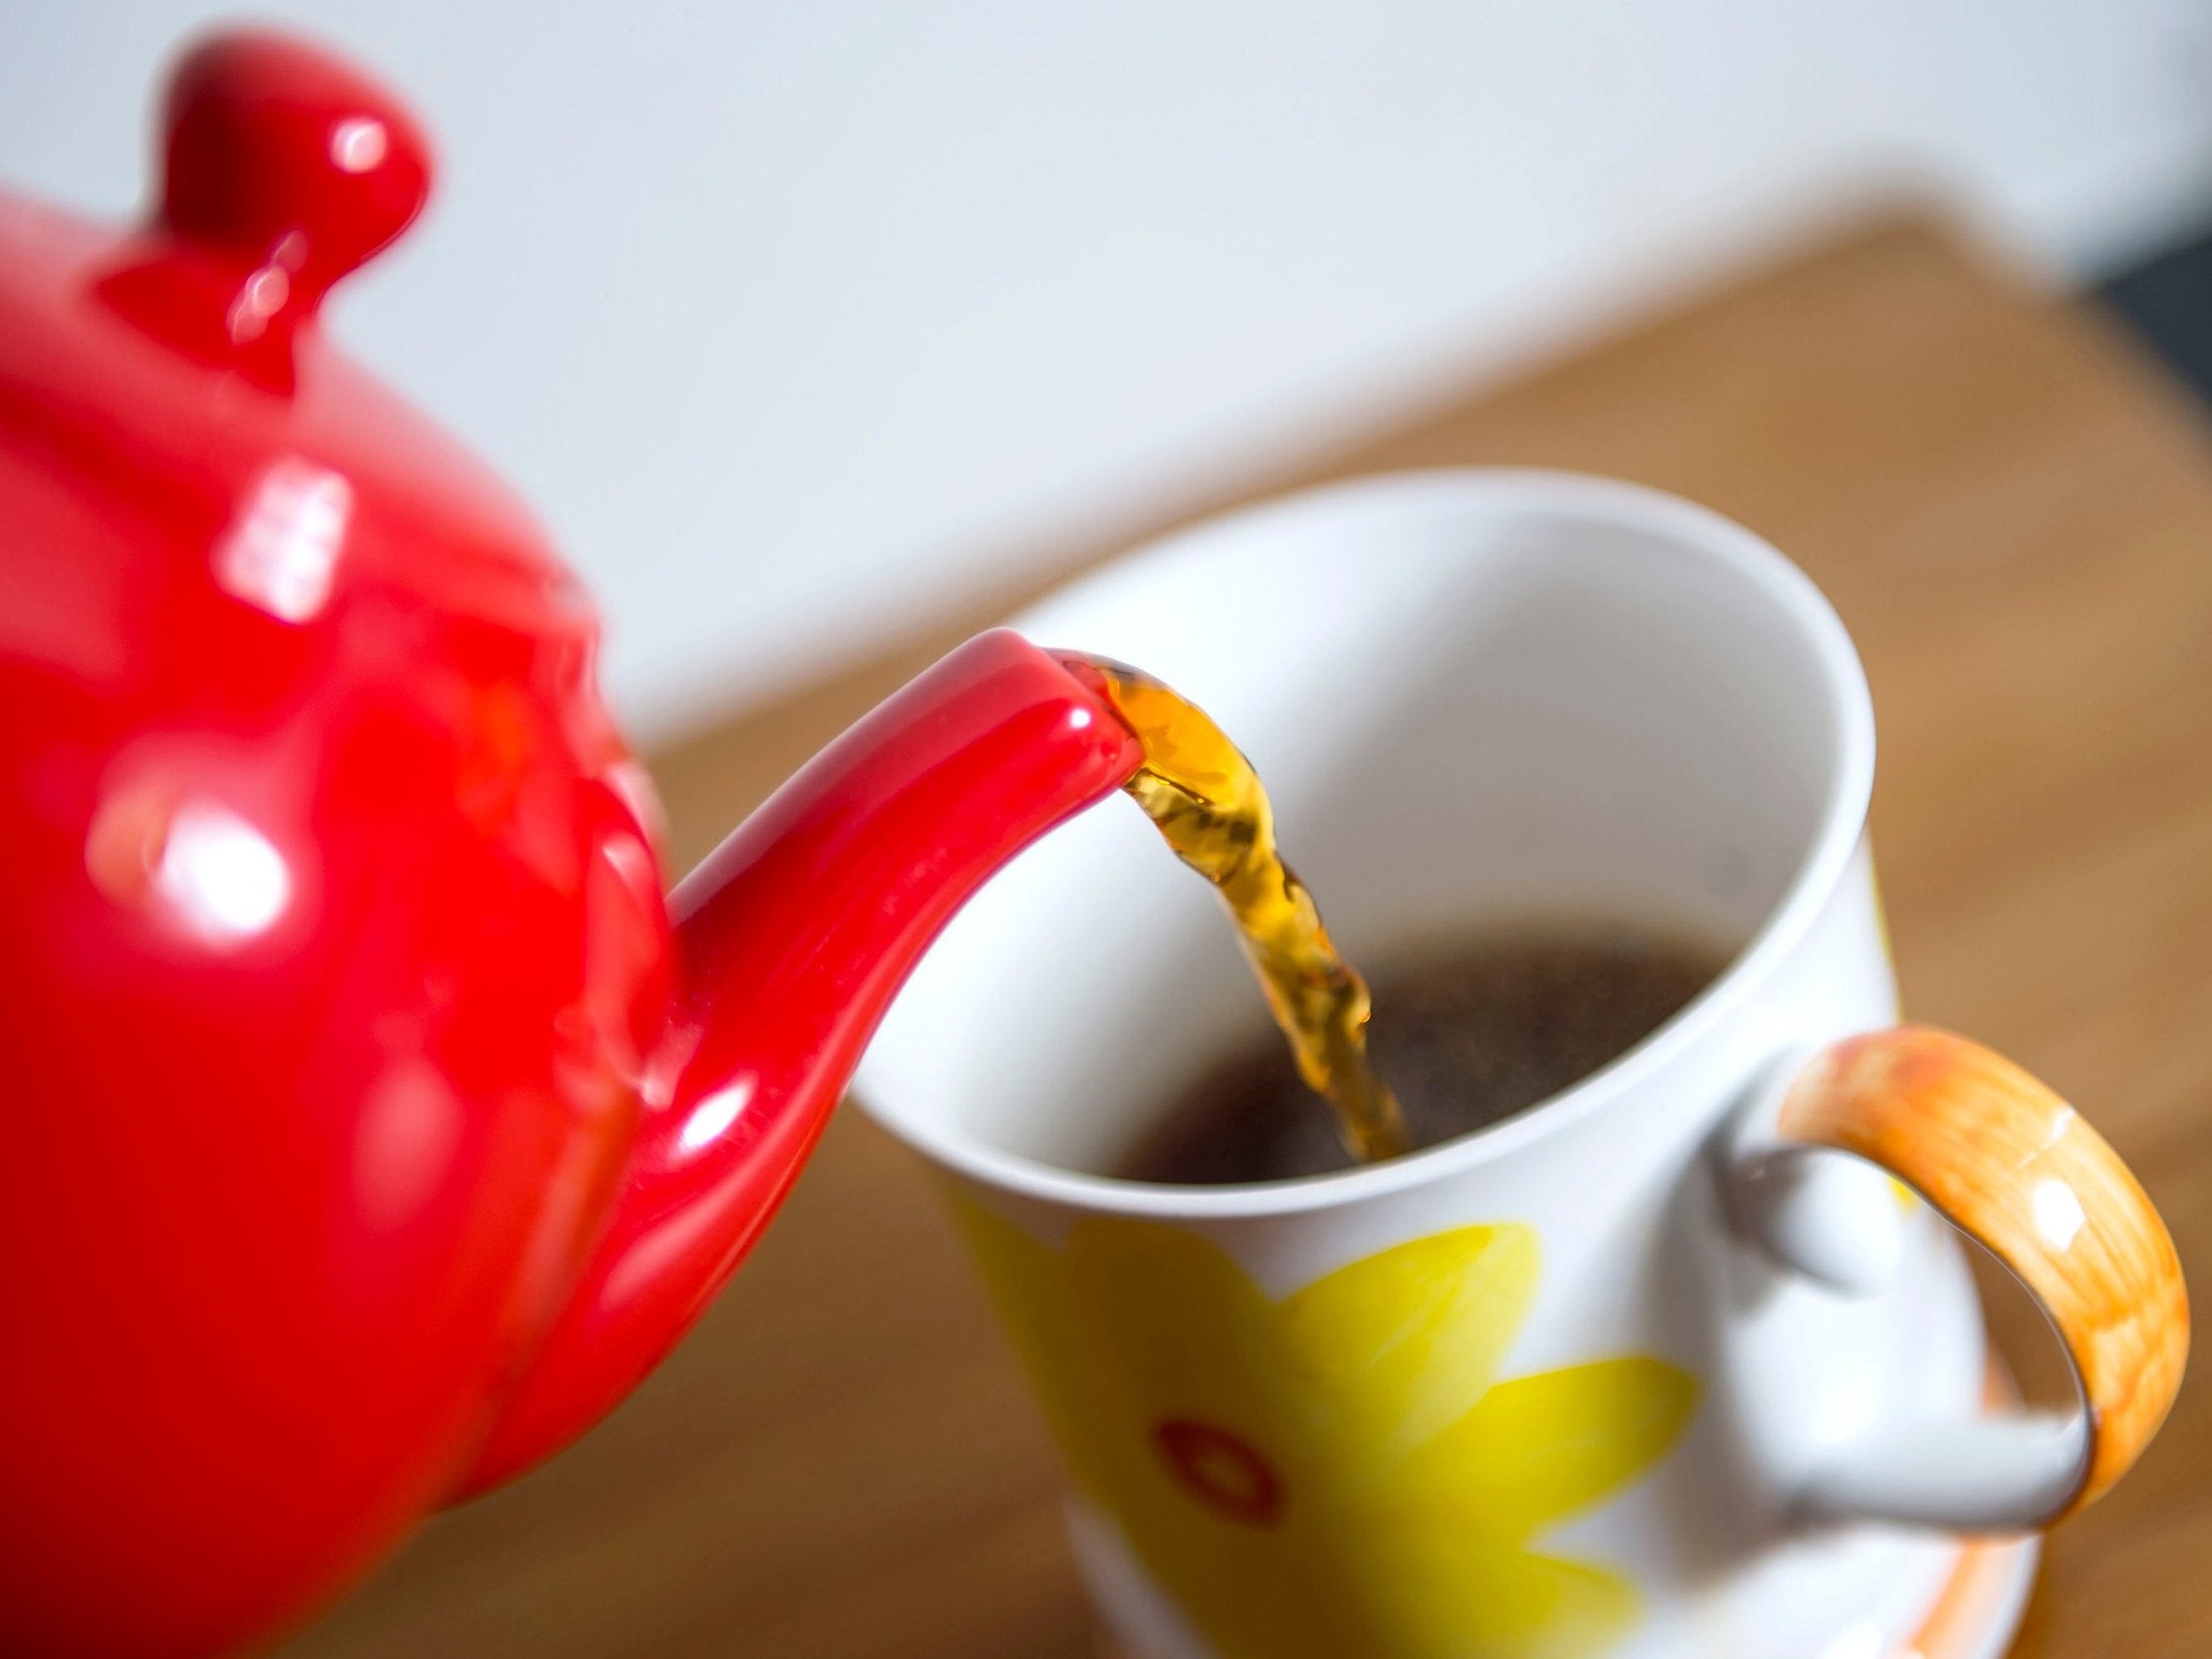 The UK and Ireland drink more cups of tea than anywhere else in the world